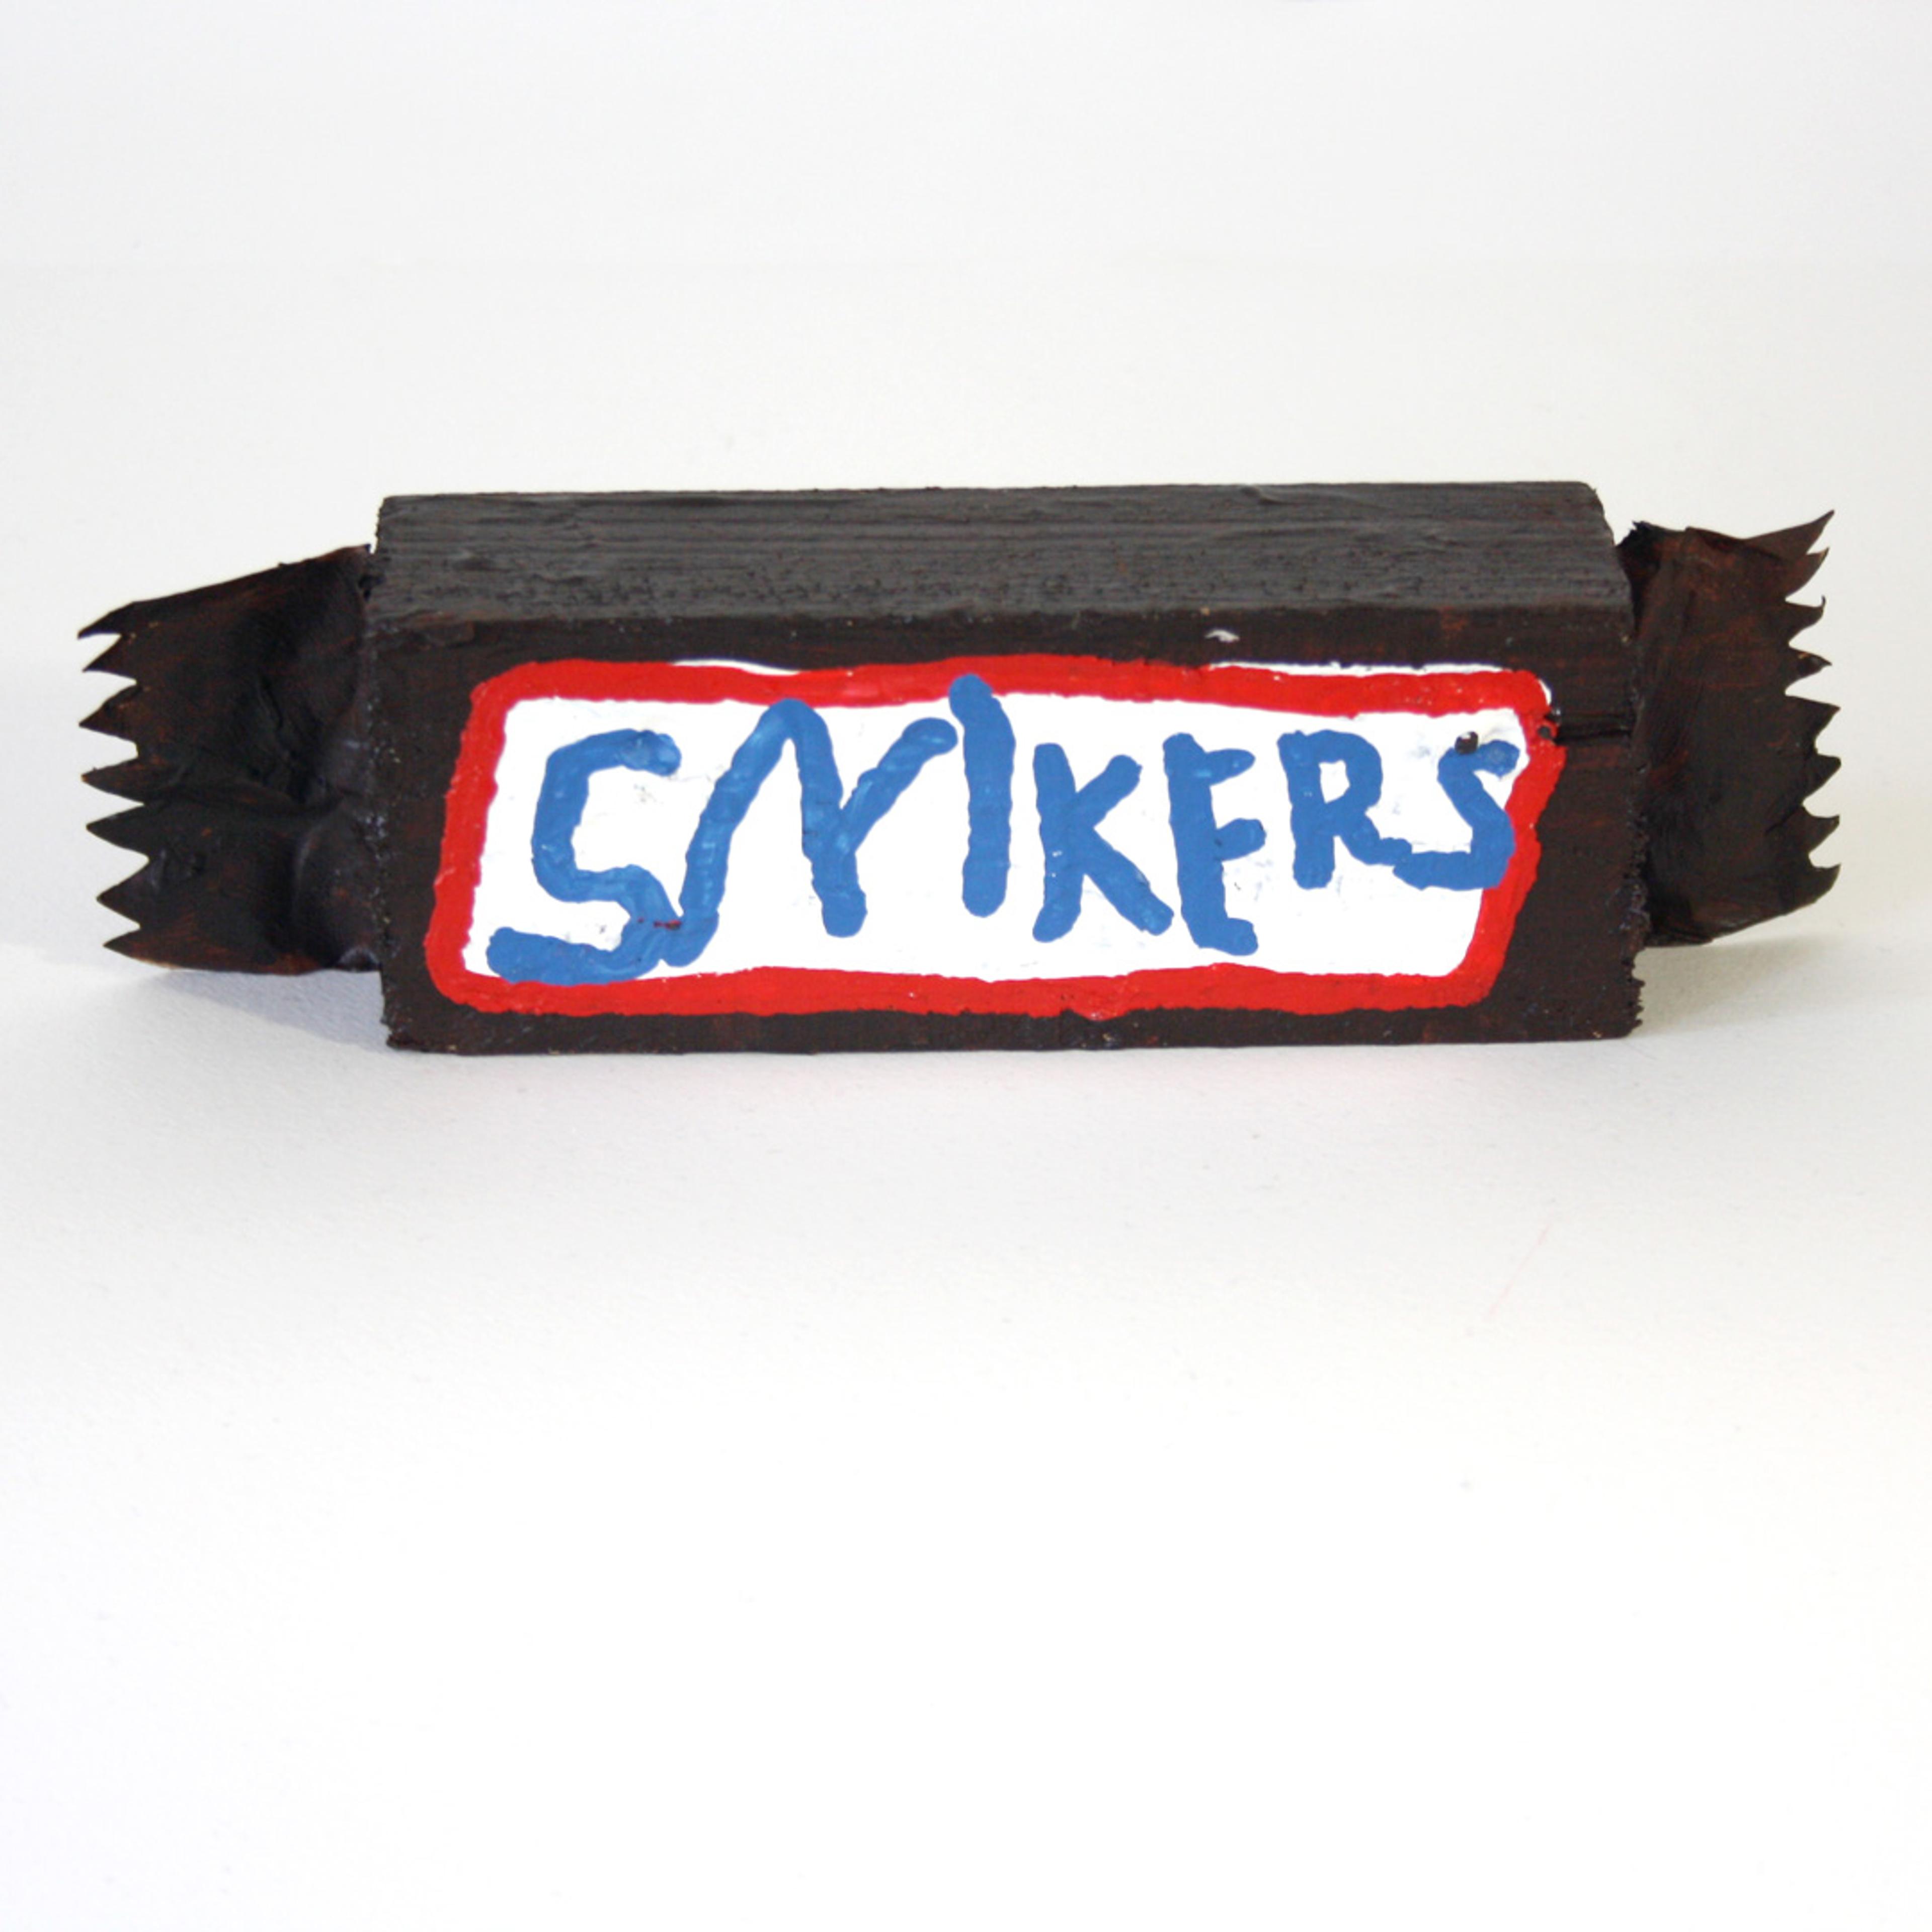 artwork „Snikers“ by Animationseries2000